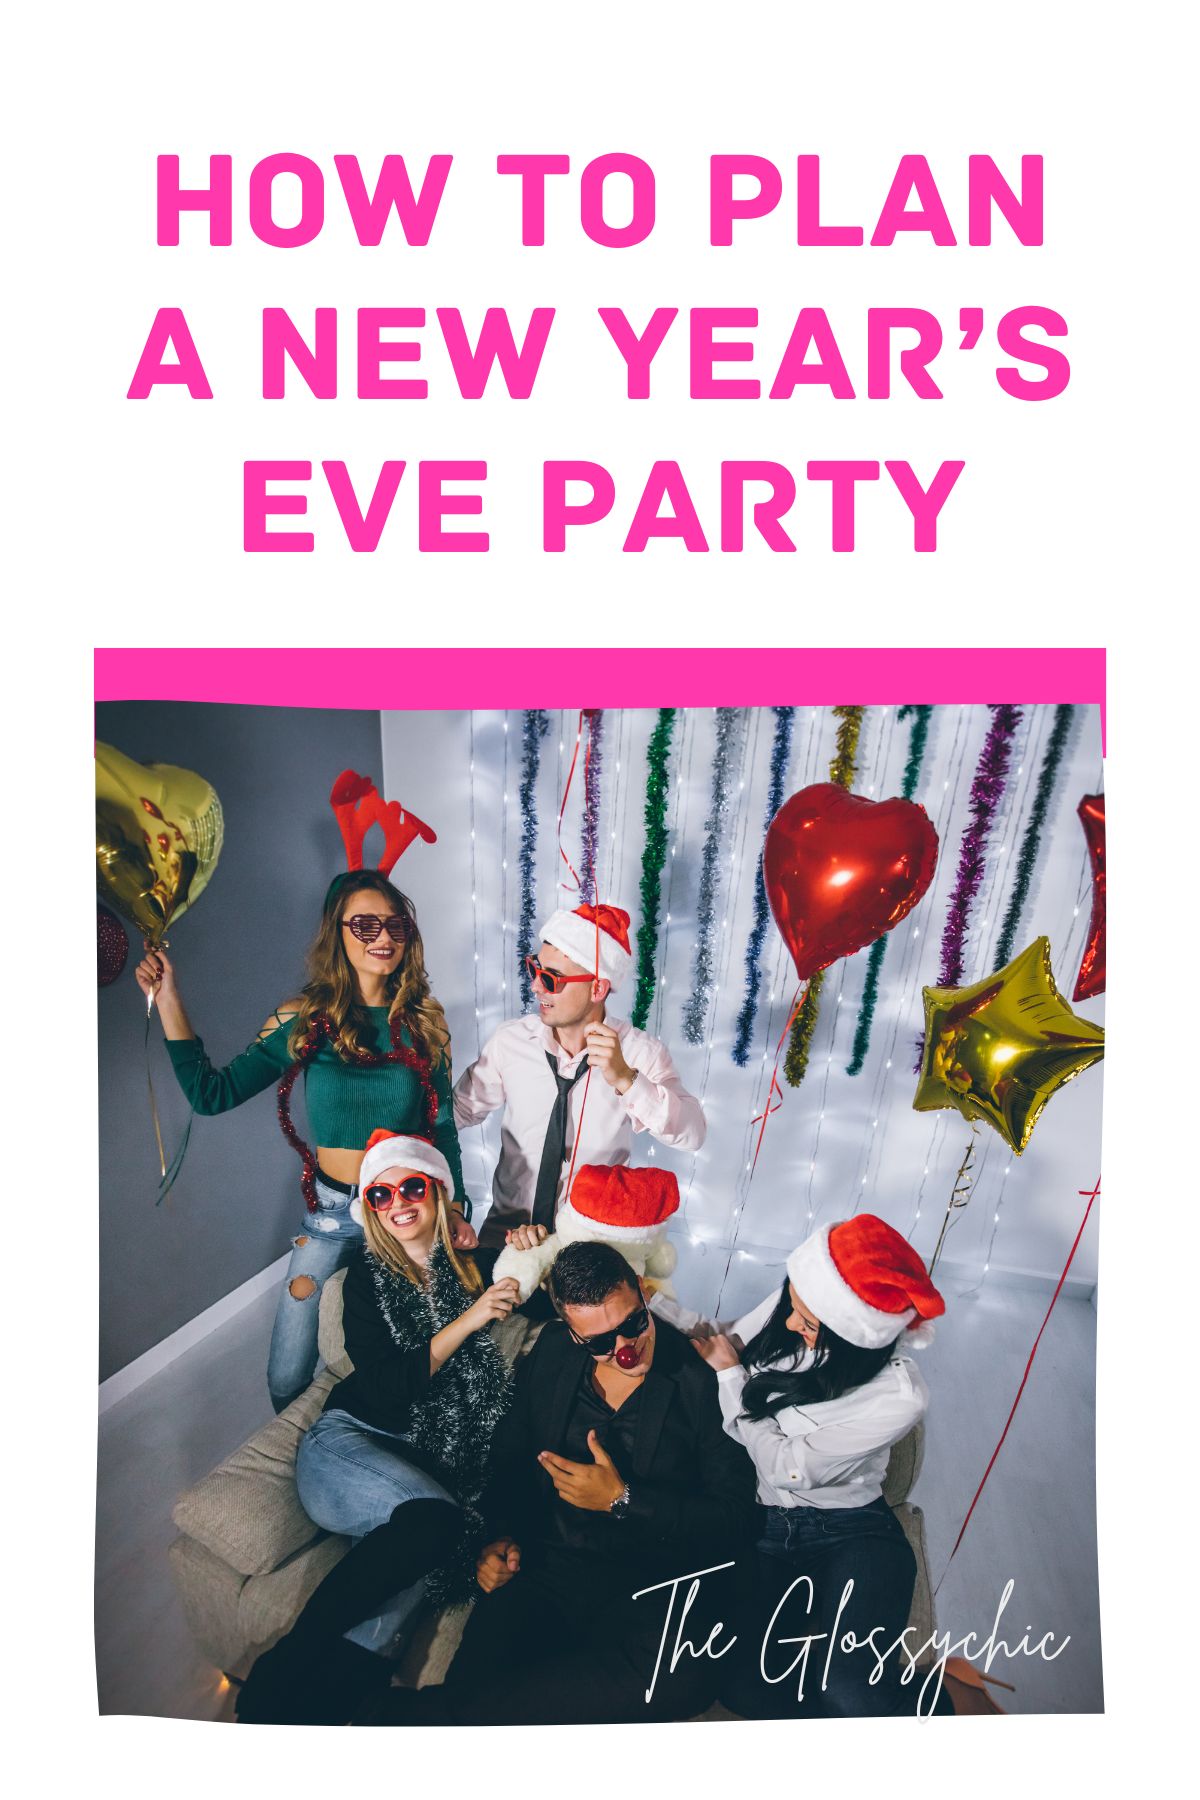 How To Plan A New Year’s Eve Party